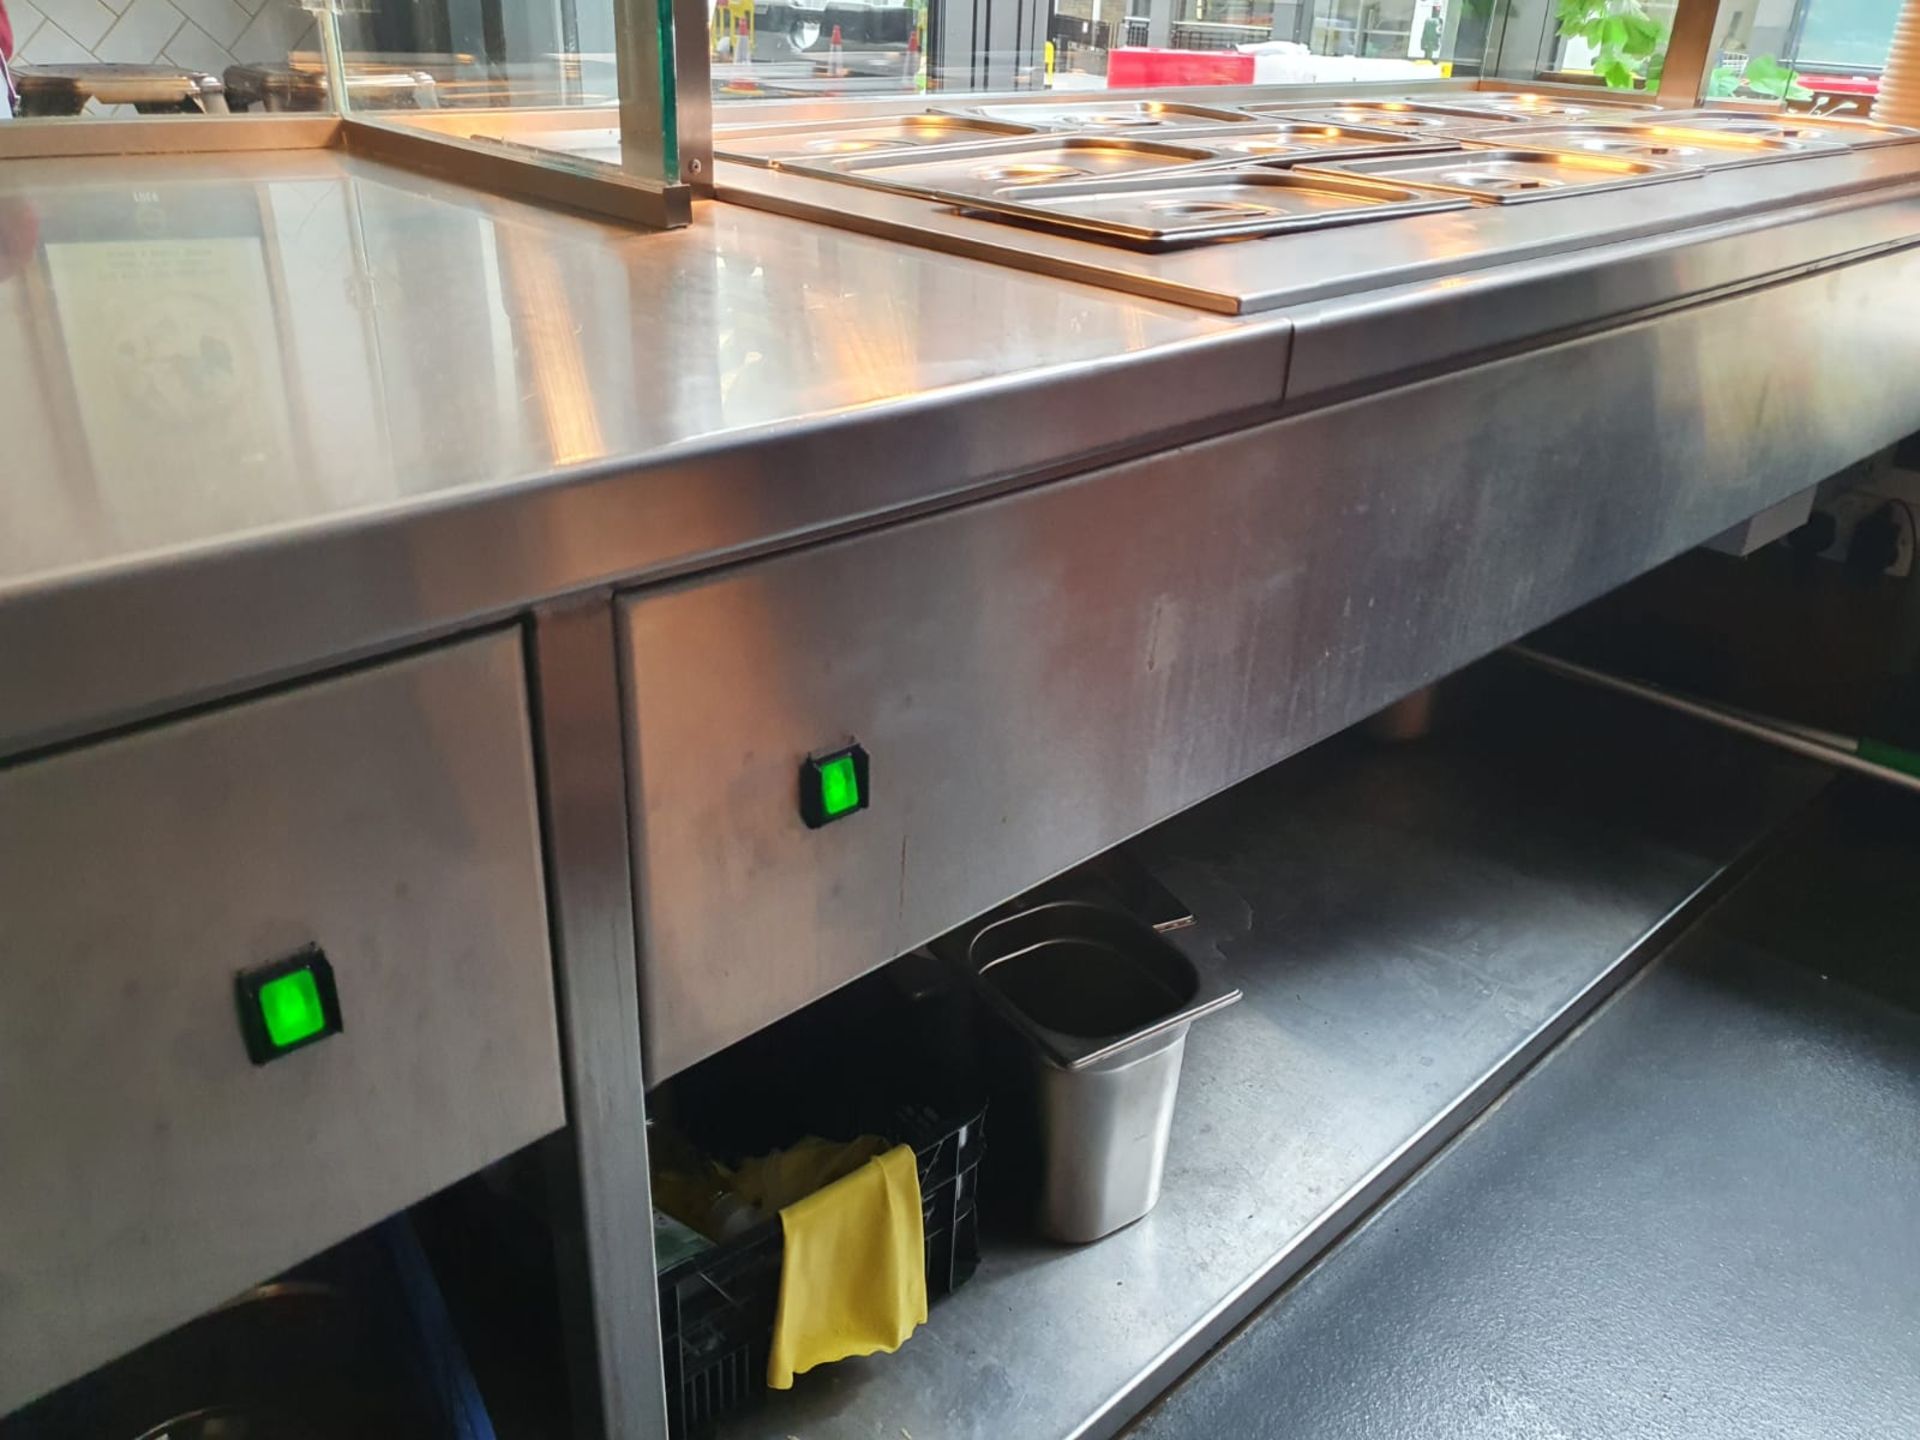 1 x Contemporary Restaurant Service Counter With Walnut Finish, Two Diamond Bain Marie Food - Image 10 of 25